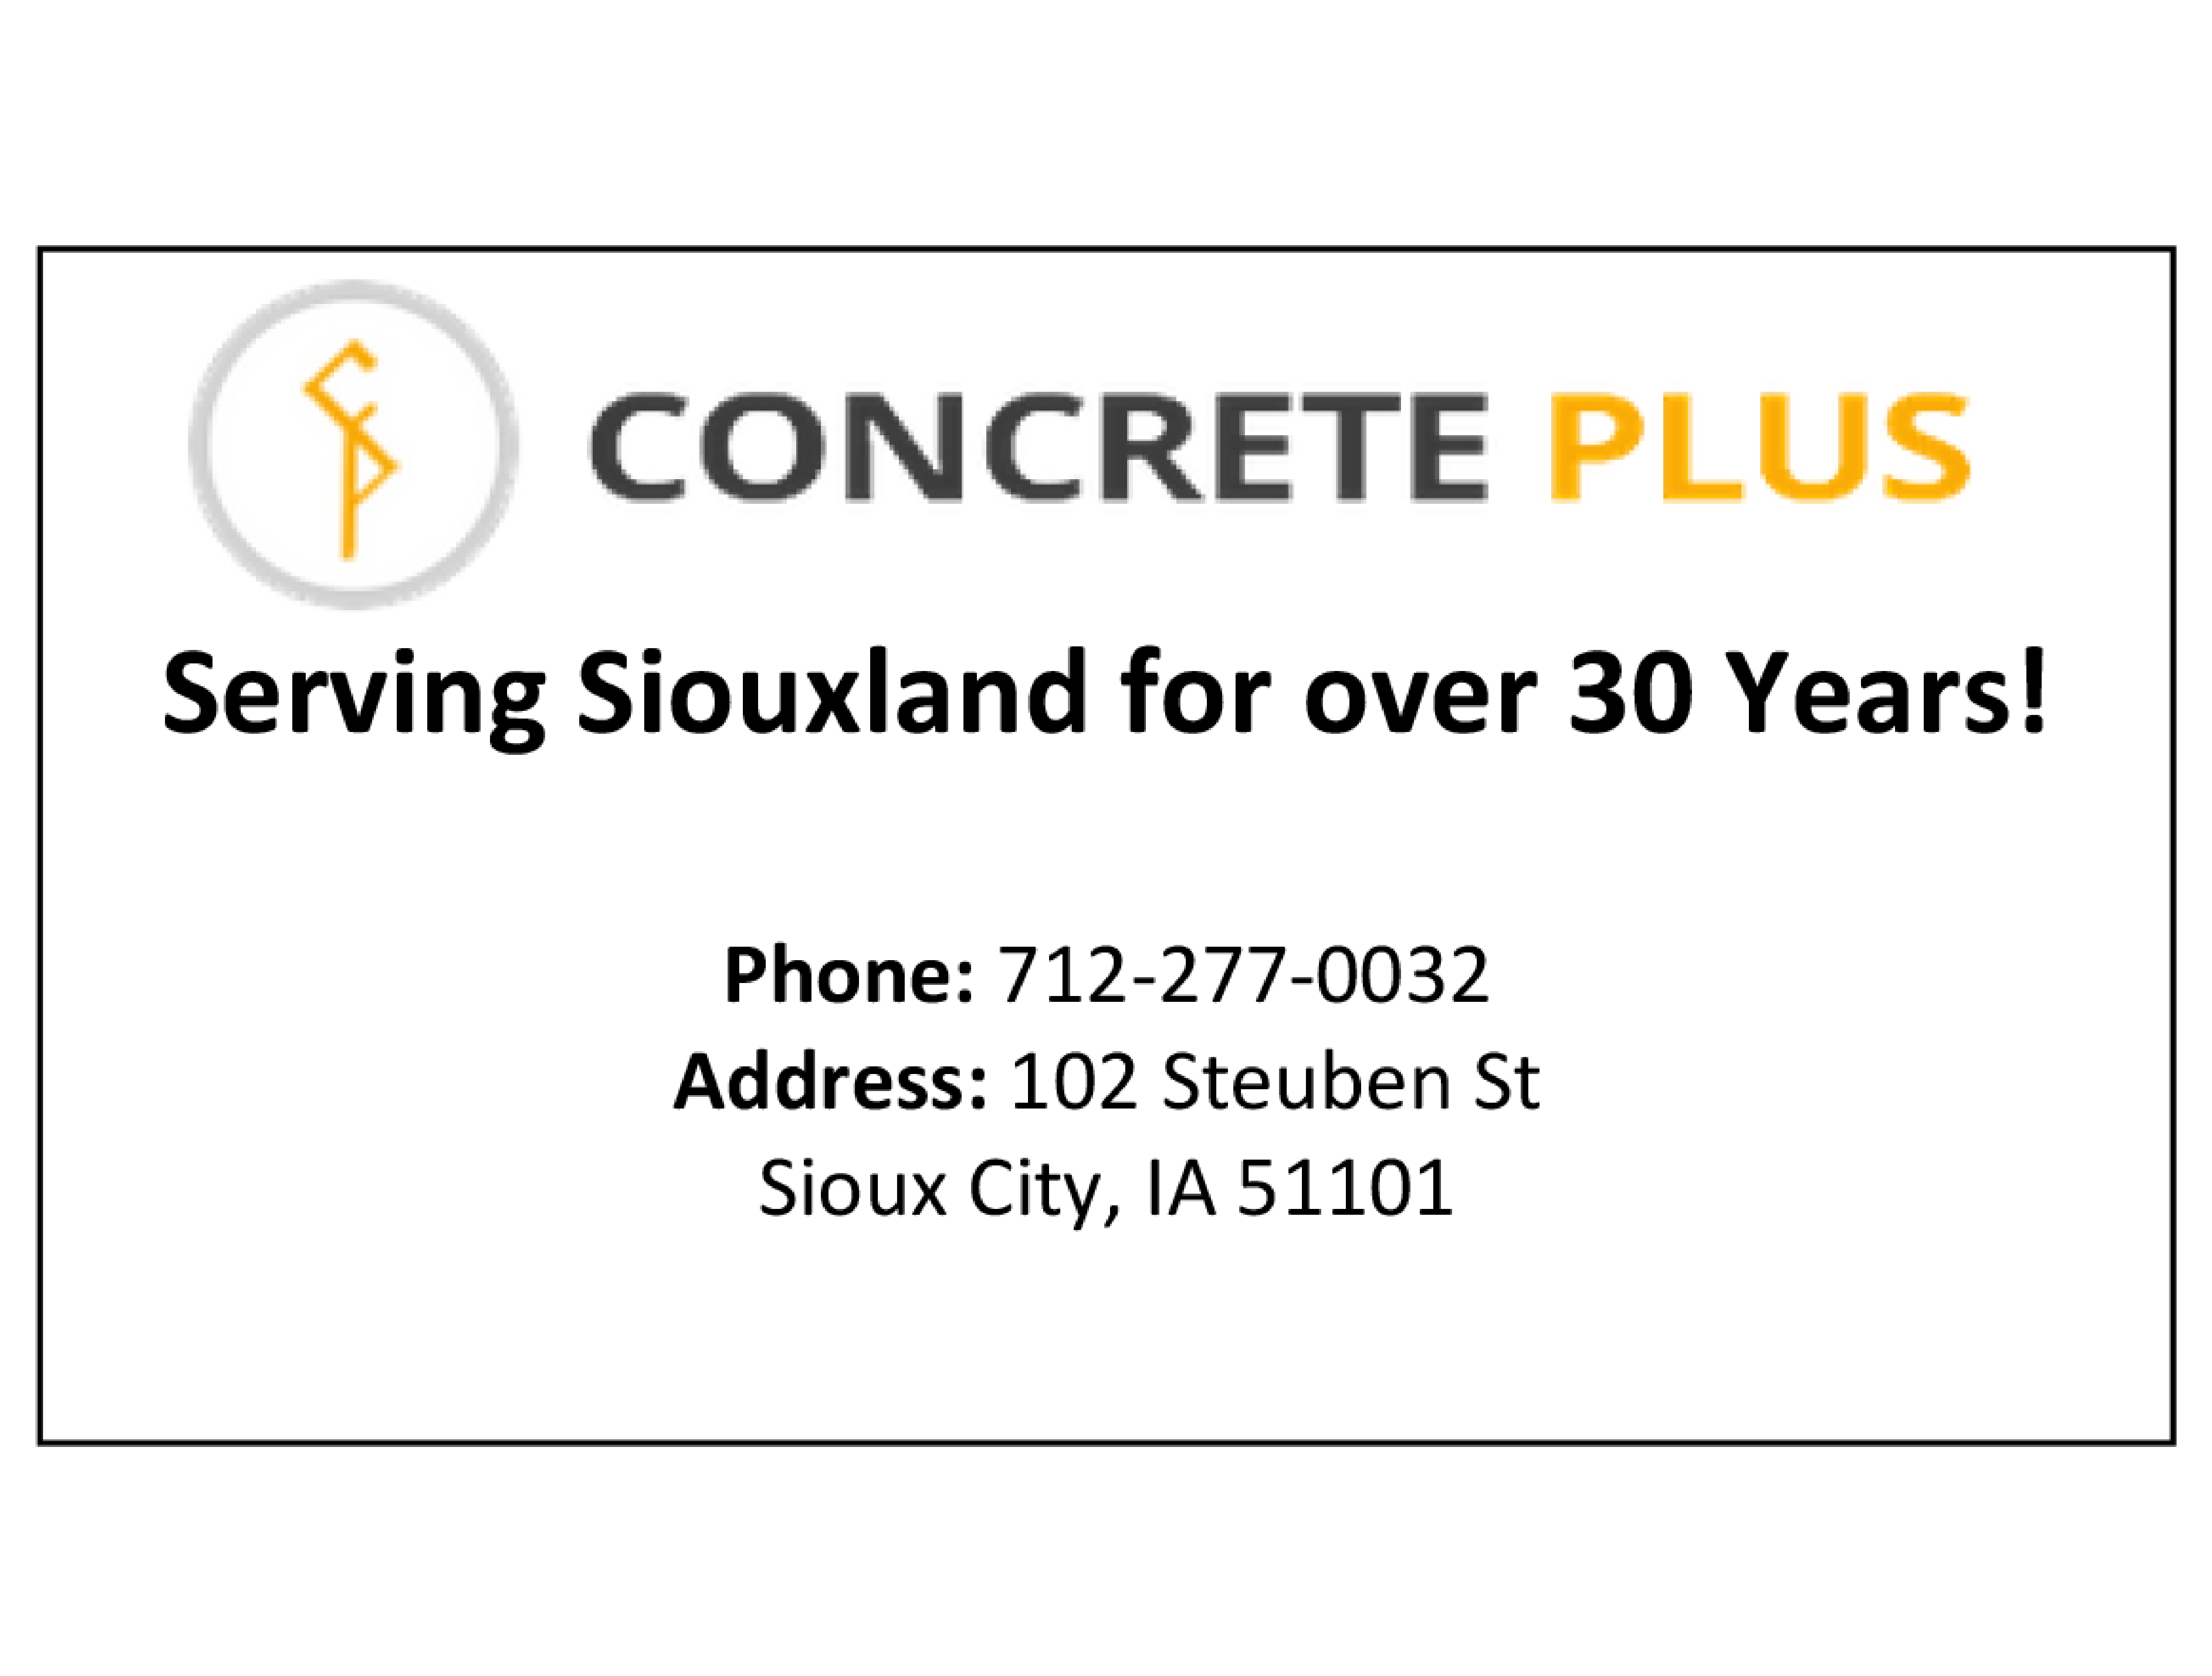 concrete plus serving sioux for over 30 years